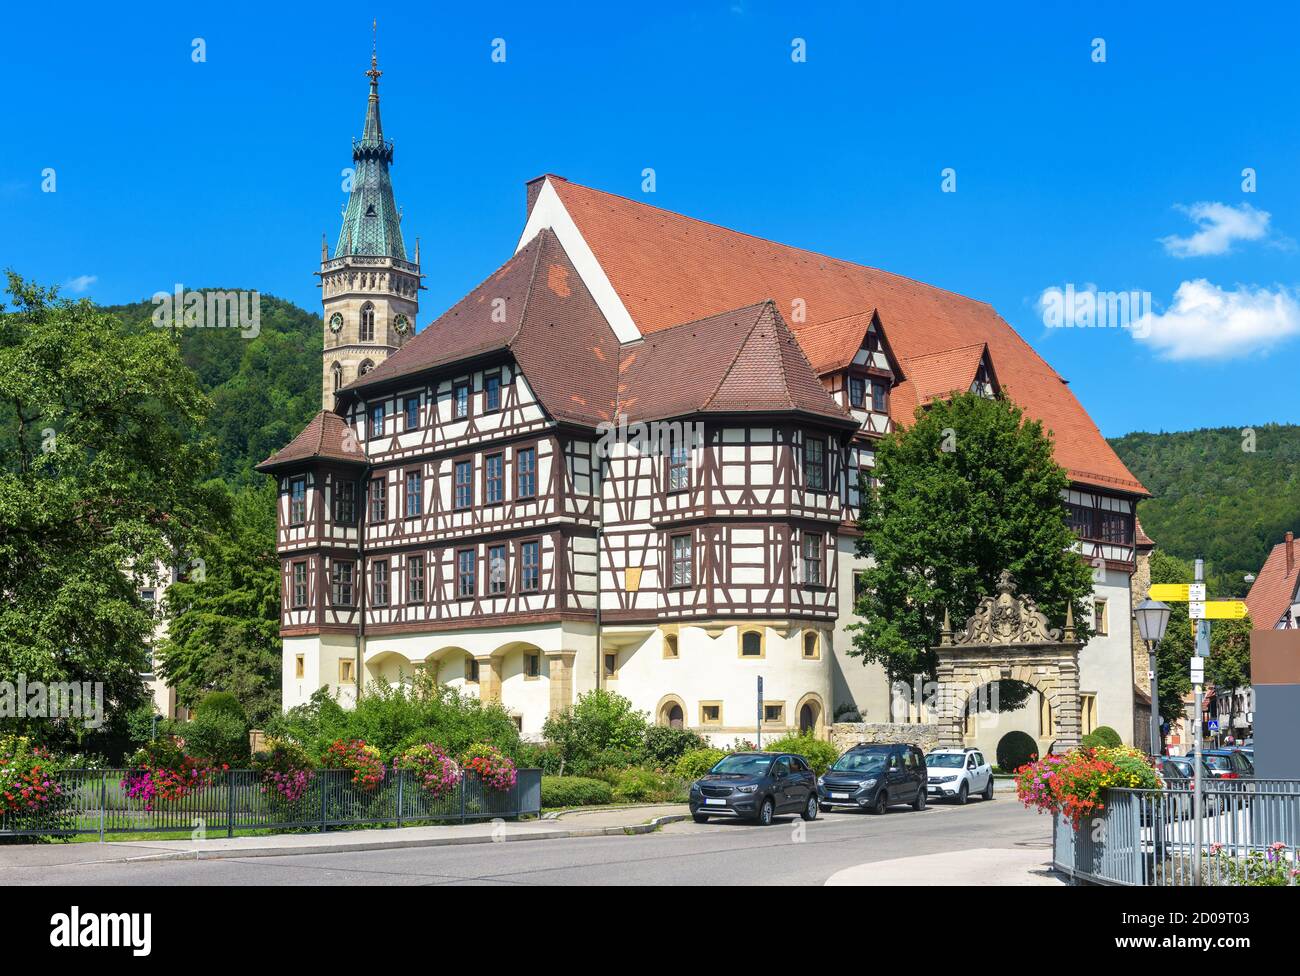 Castle Residence (Residenzschloss) or Residential Palace in Bad Urach, Germany. This beautiful castle is landmark of Baden-Wurttemberg. Medieval half- Stock Photo